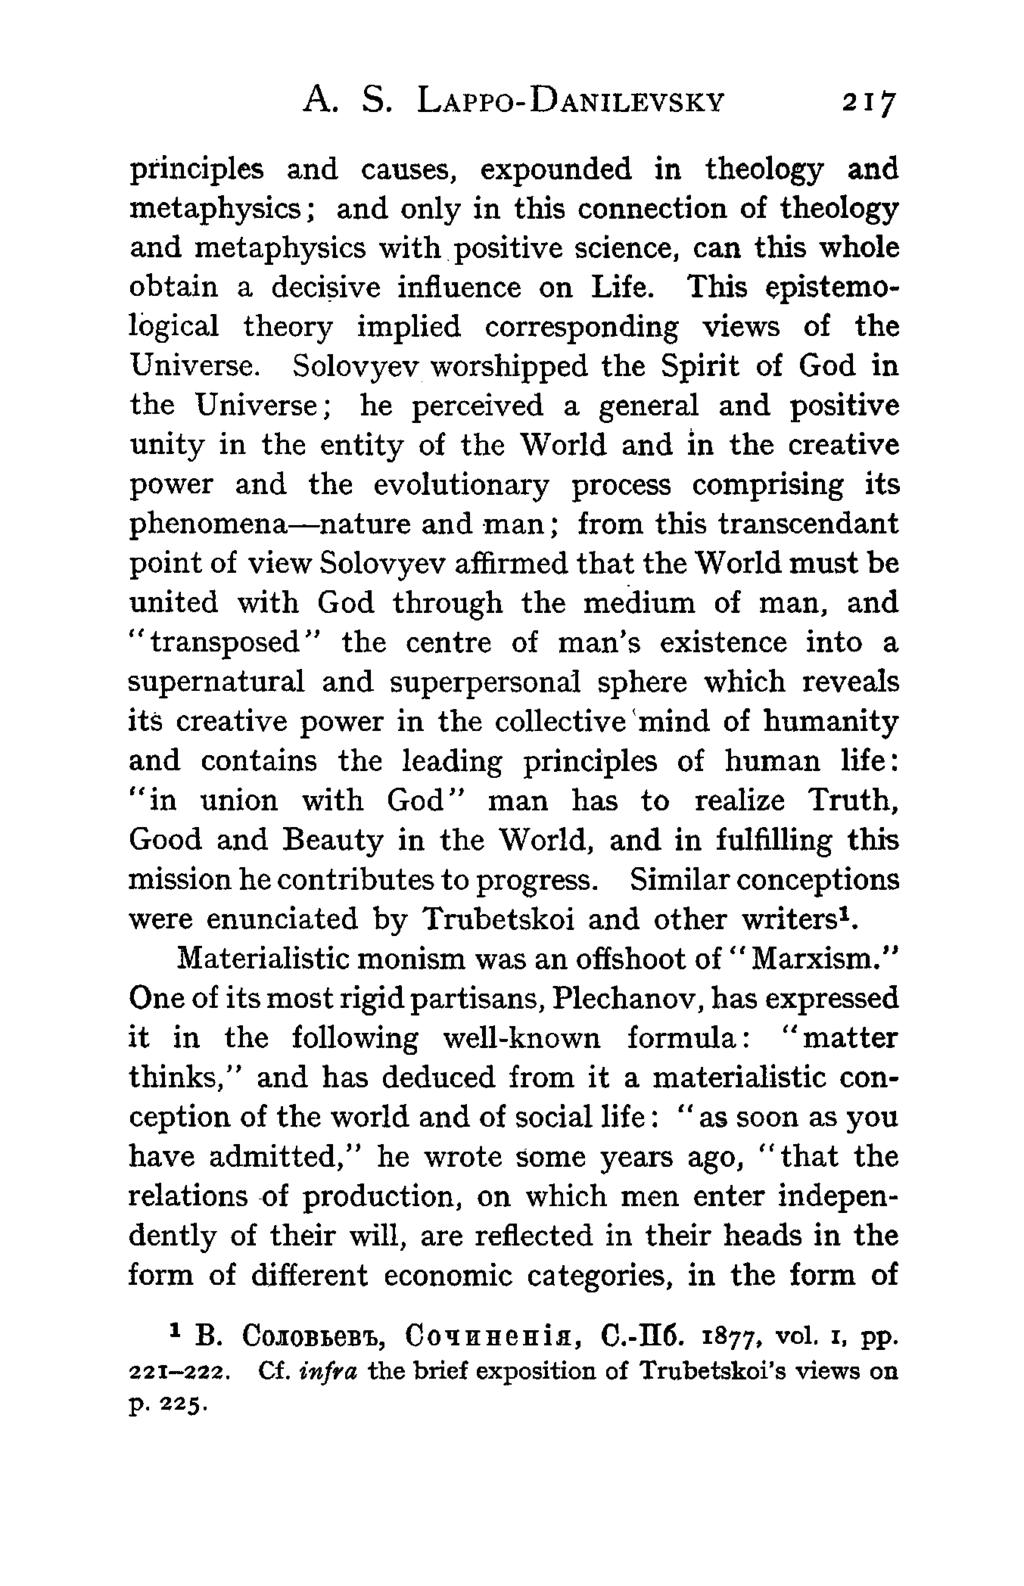 A. S. LAPPO-DANILEVSKY 217 principles and causes, expounded in theology and metaphysics; and only in this connection of theology and metaphysics with positive science, can this whole obtain a